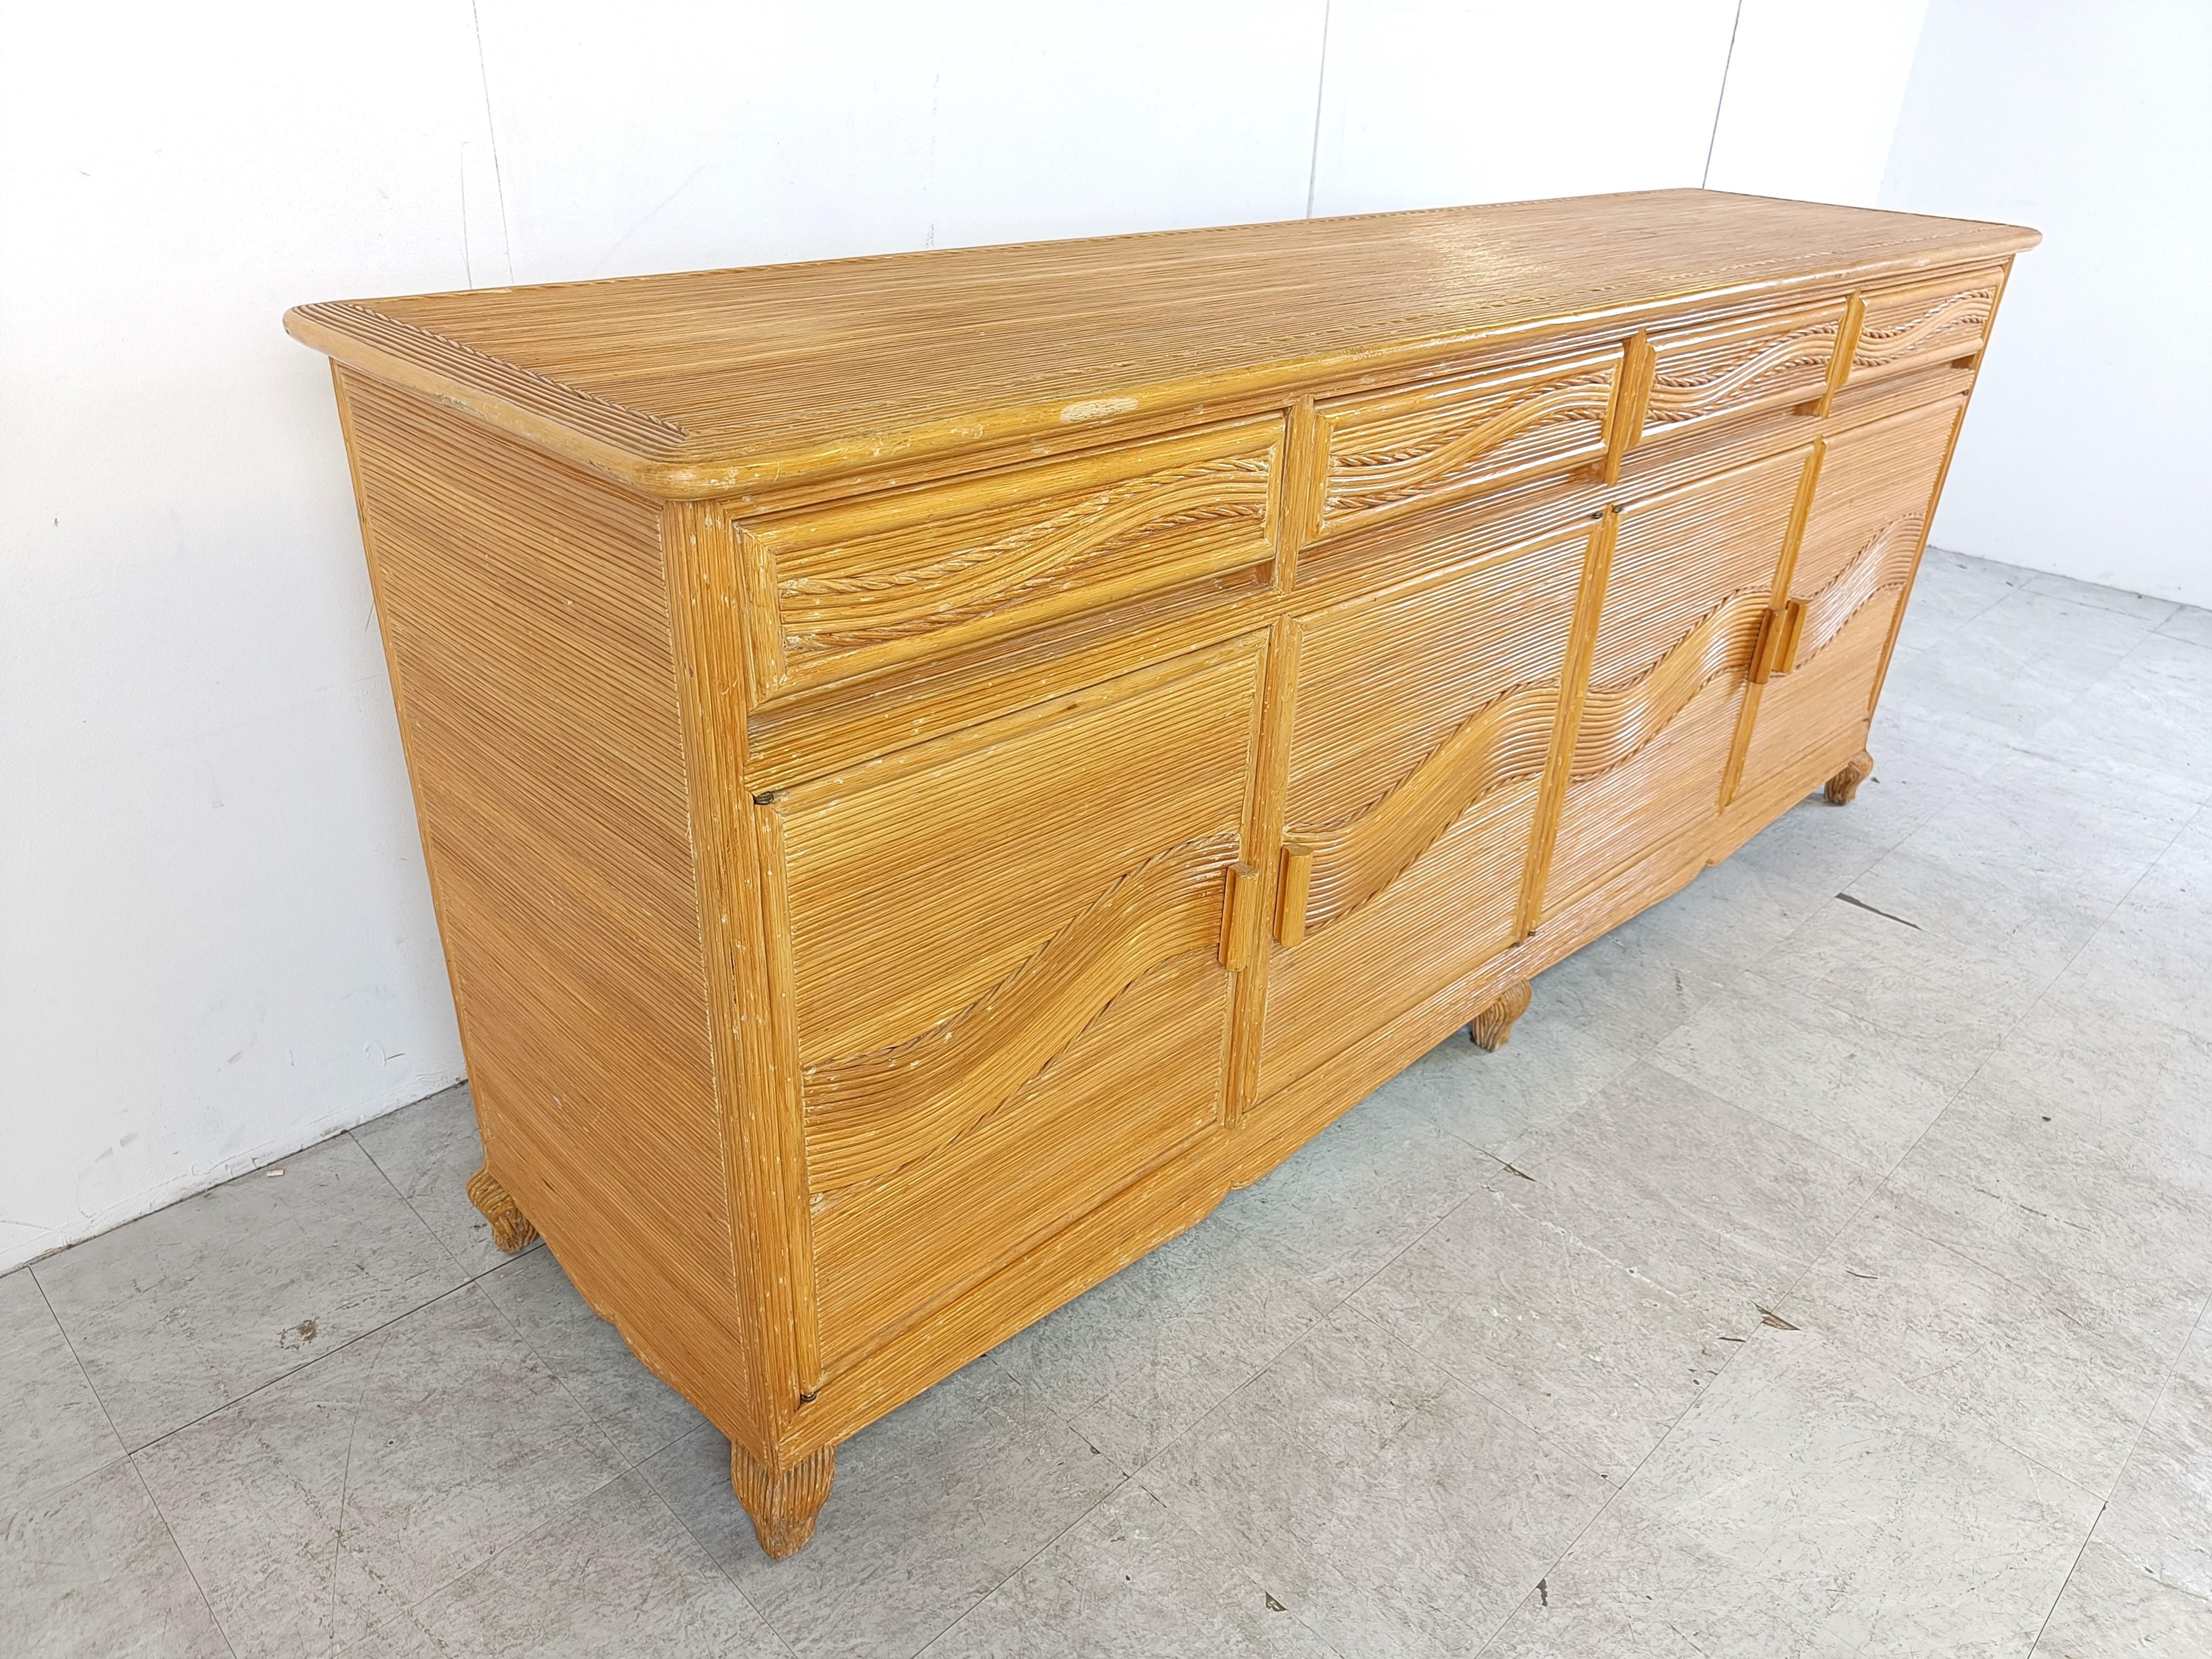 Elegant pencil reed sideboard with 4 doors and 4 drawers.

Very decorative pattern.

Good condition.

1970s - France

Dimensions:
Lenght: 220cm/76.77